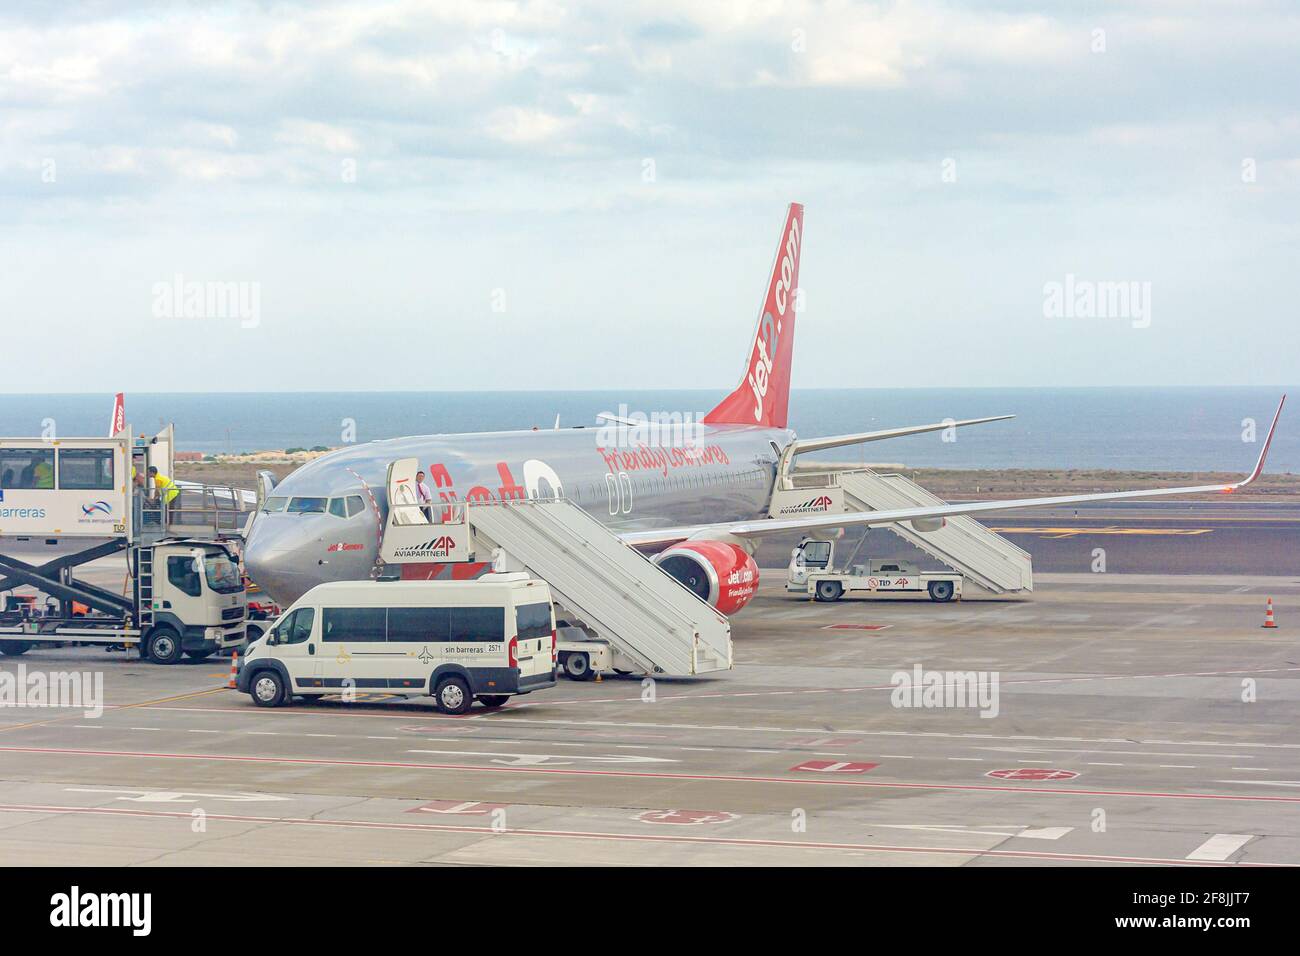 TENERIFE, SPAIN - March 21, 2021: A plane with the inscription Friendly Low Fares at the southern airport of the island of Tenerife. Stock photo. Stock Photo